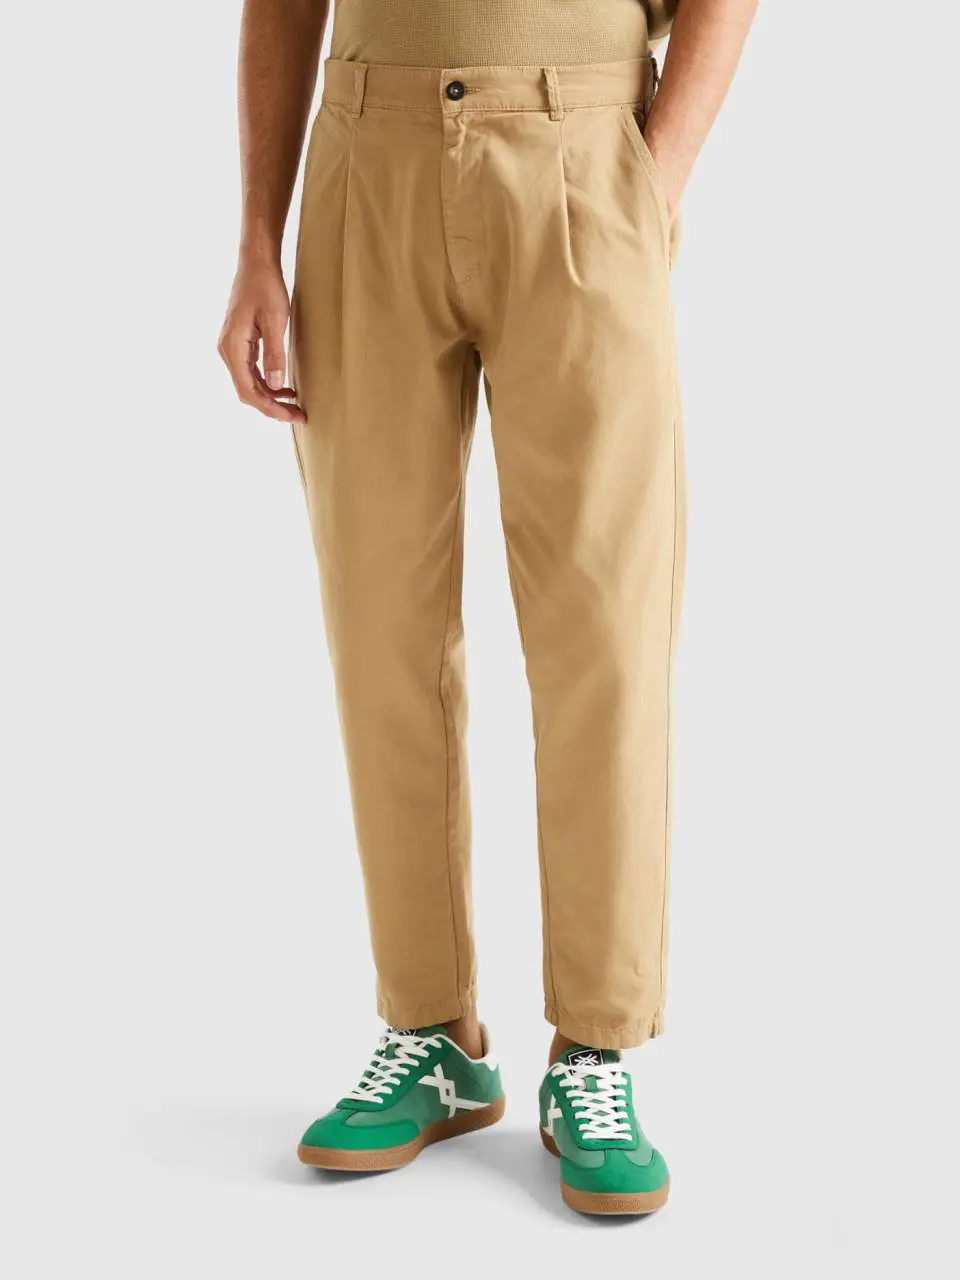 Benetton carrot fit chinos in light cotton. 1